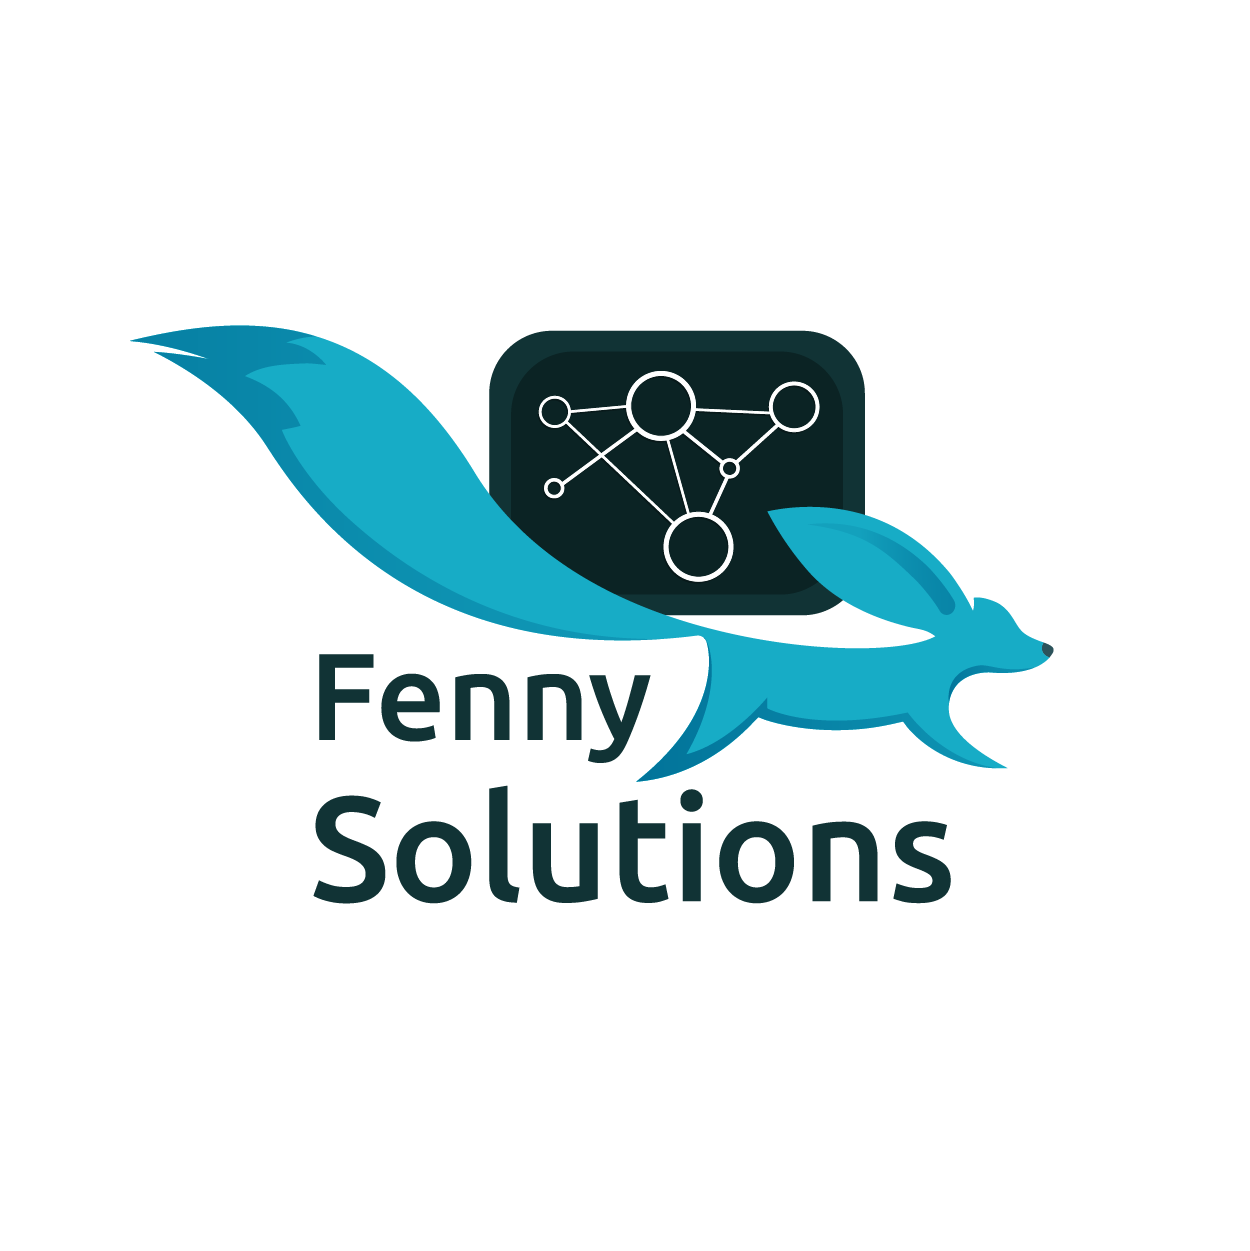 Fenny Solutions profile on Qualified.One